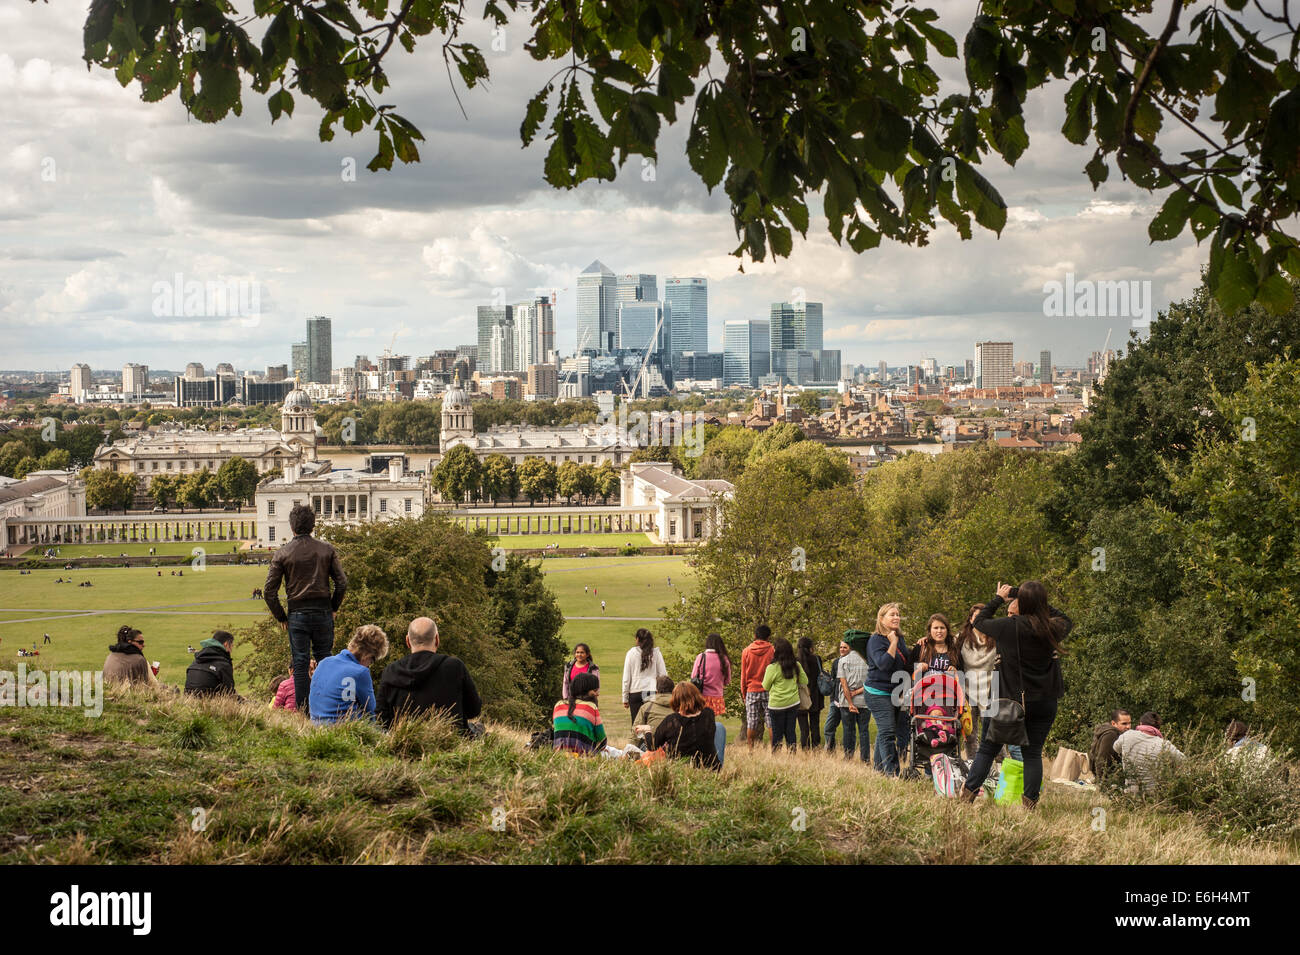 London, UK - 23 August 2014: Visitors enjoy the view of the Canary Wharf skyscrapers from Greenwich park in London Stock Photo